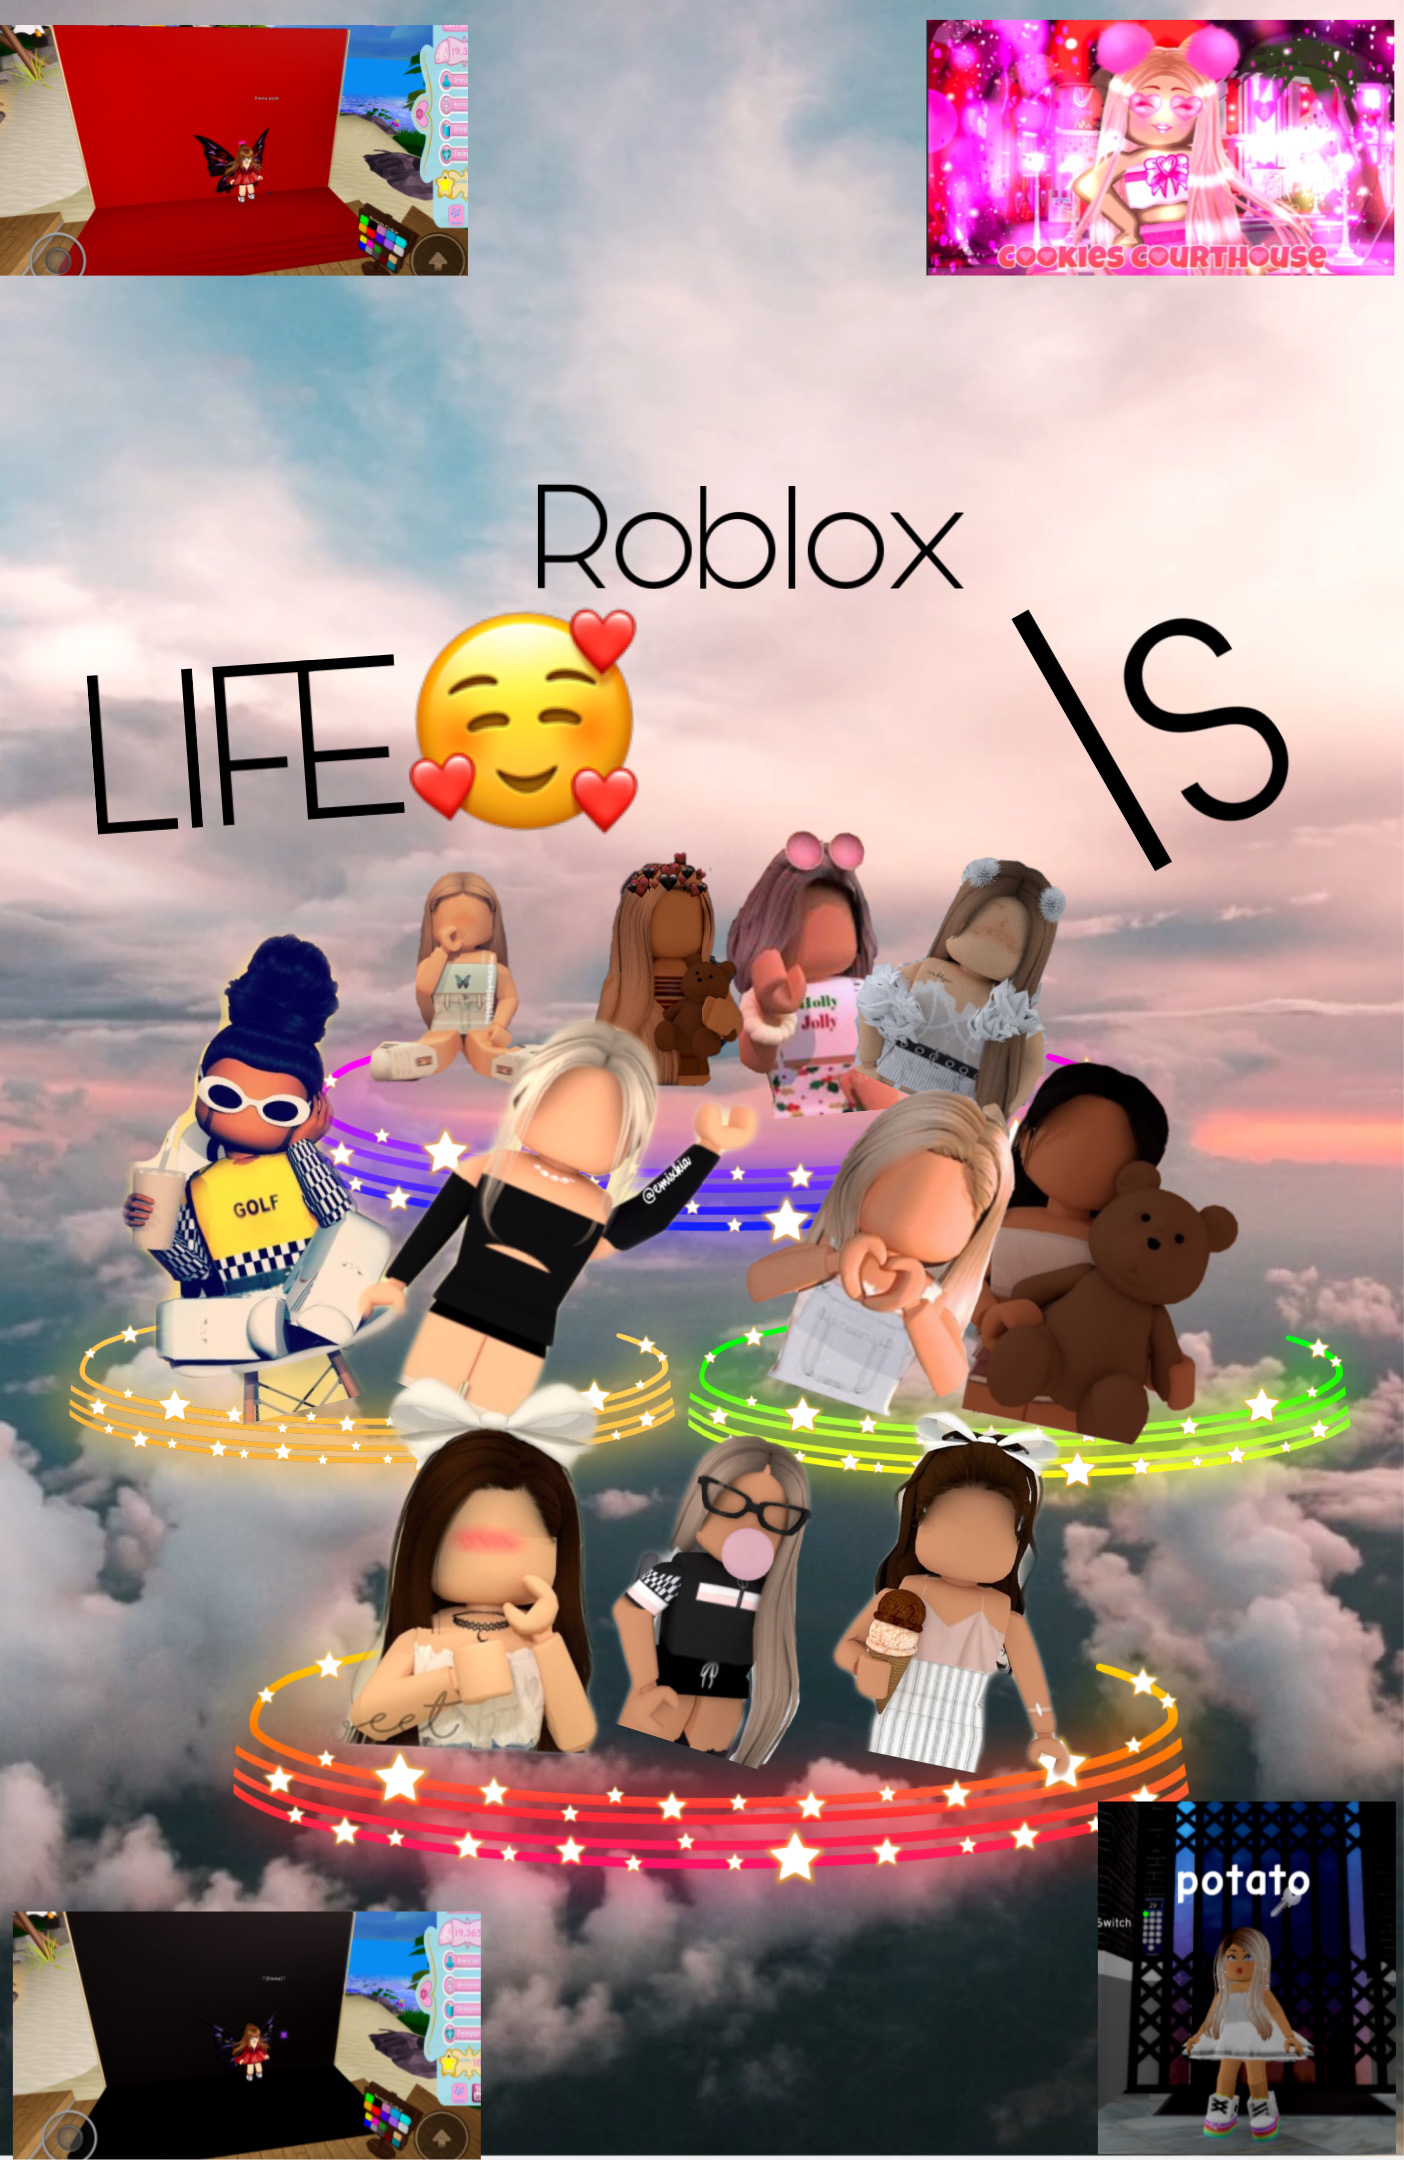 Roblox Image By Ur Local Hottie - roblox courthouse